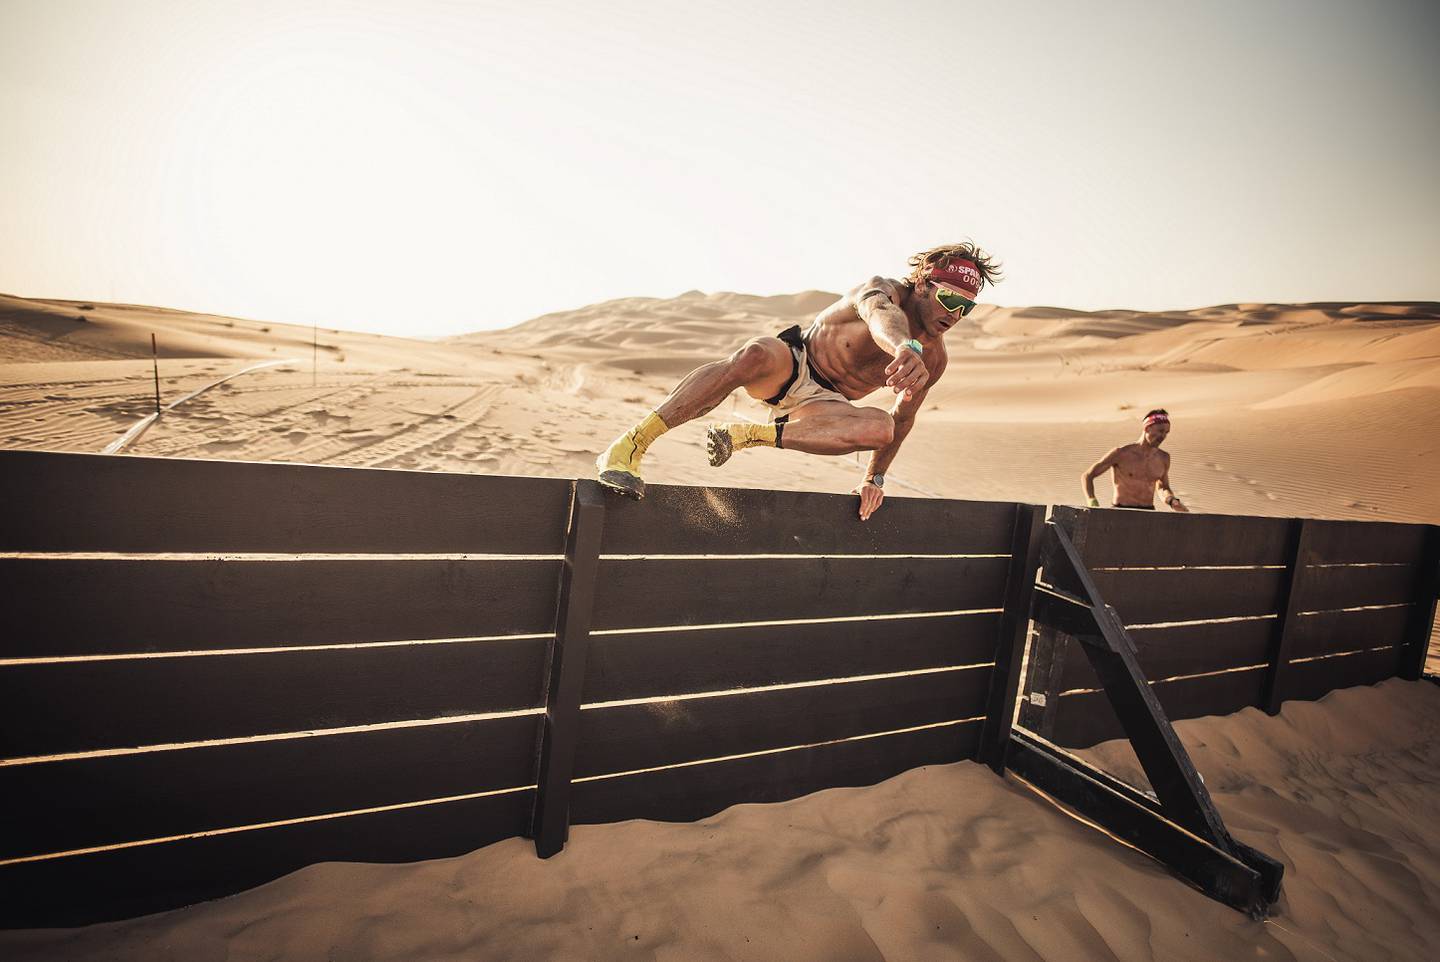 Last year, Abu Dhabi became the first city outside of the US to host the Spartan World Championship. Photo: Spartan